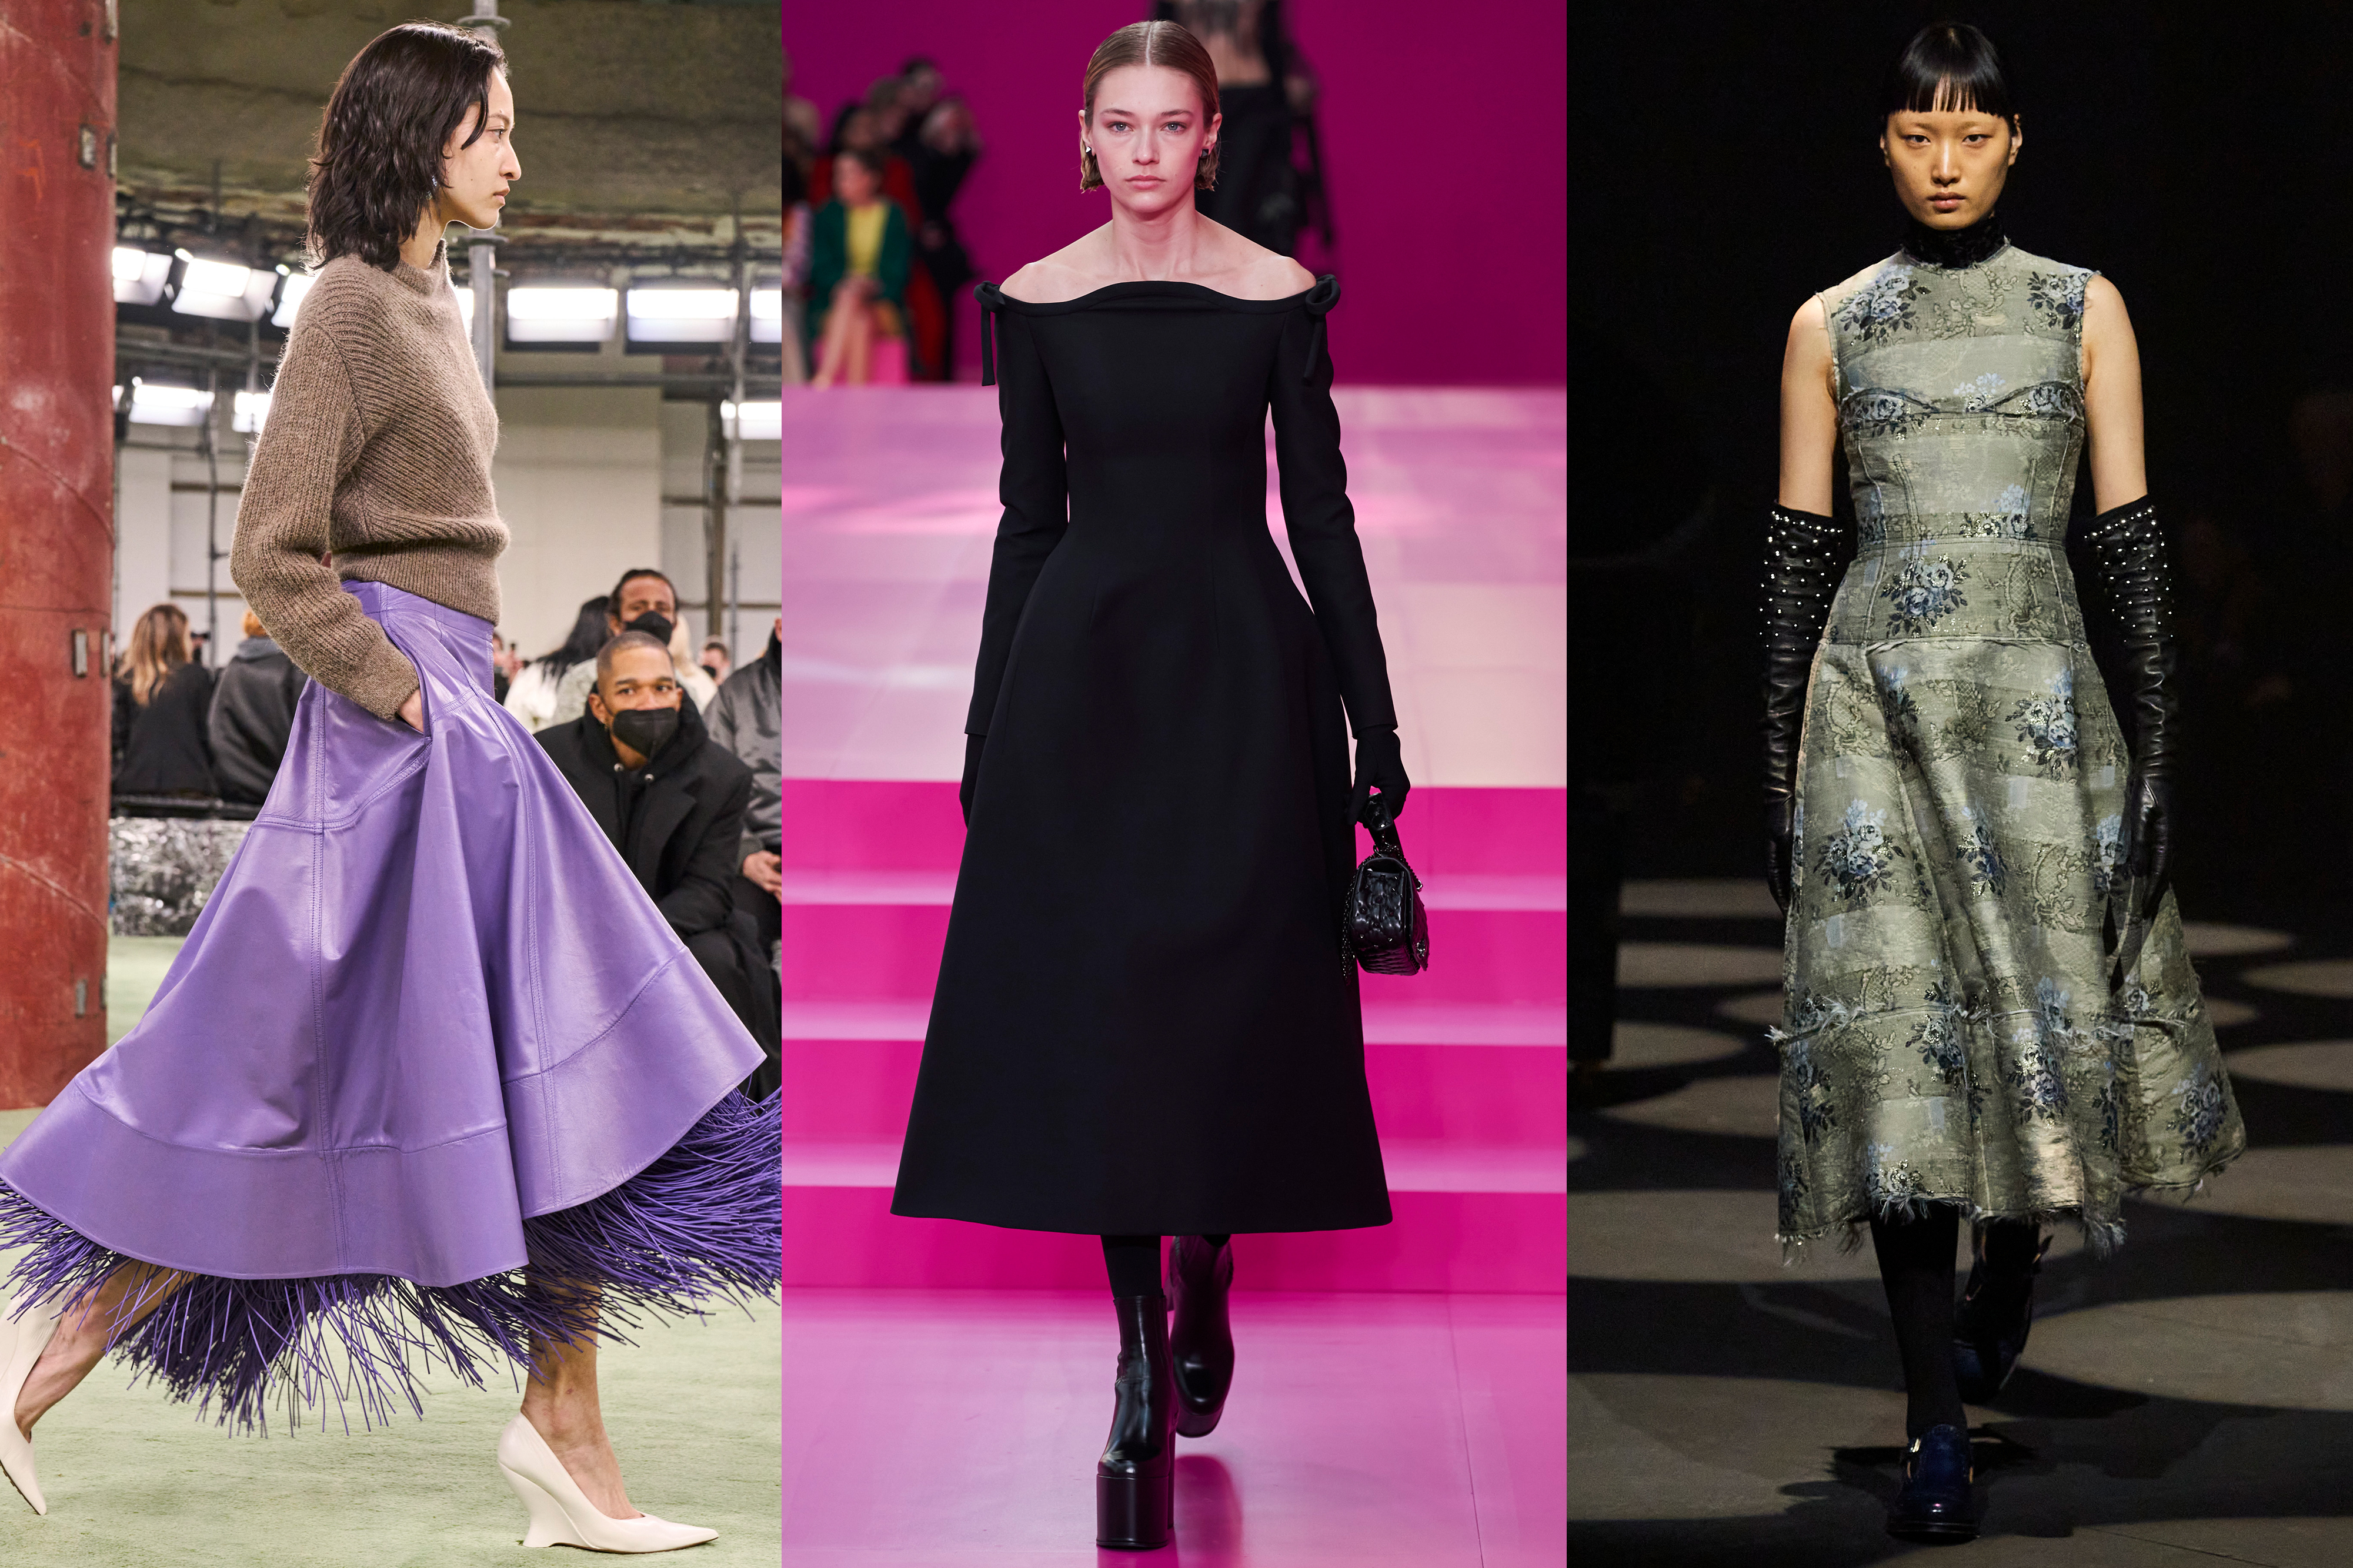 How To Master The New Season's 'Modern Elegance' Trend 2022